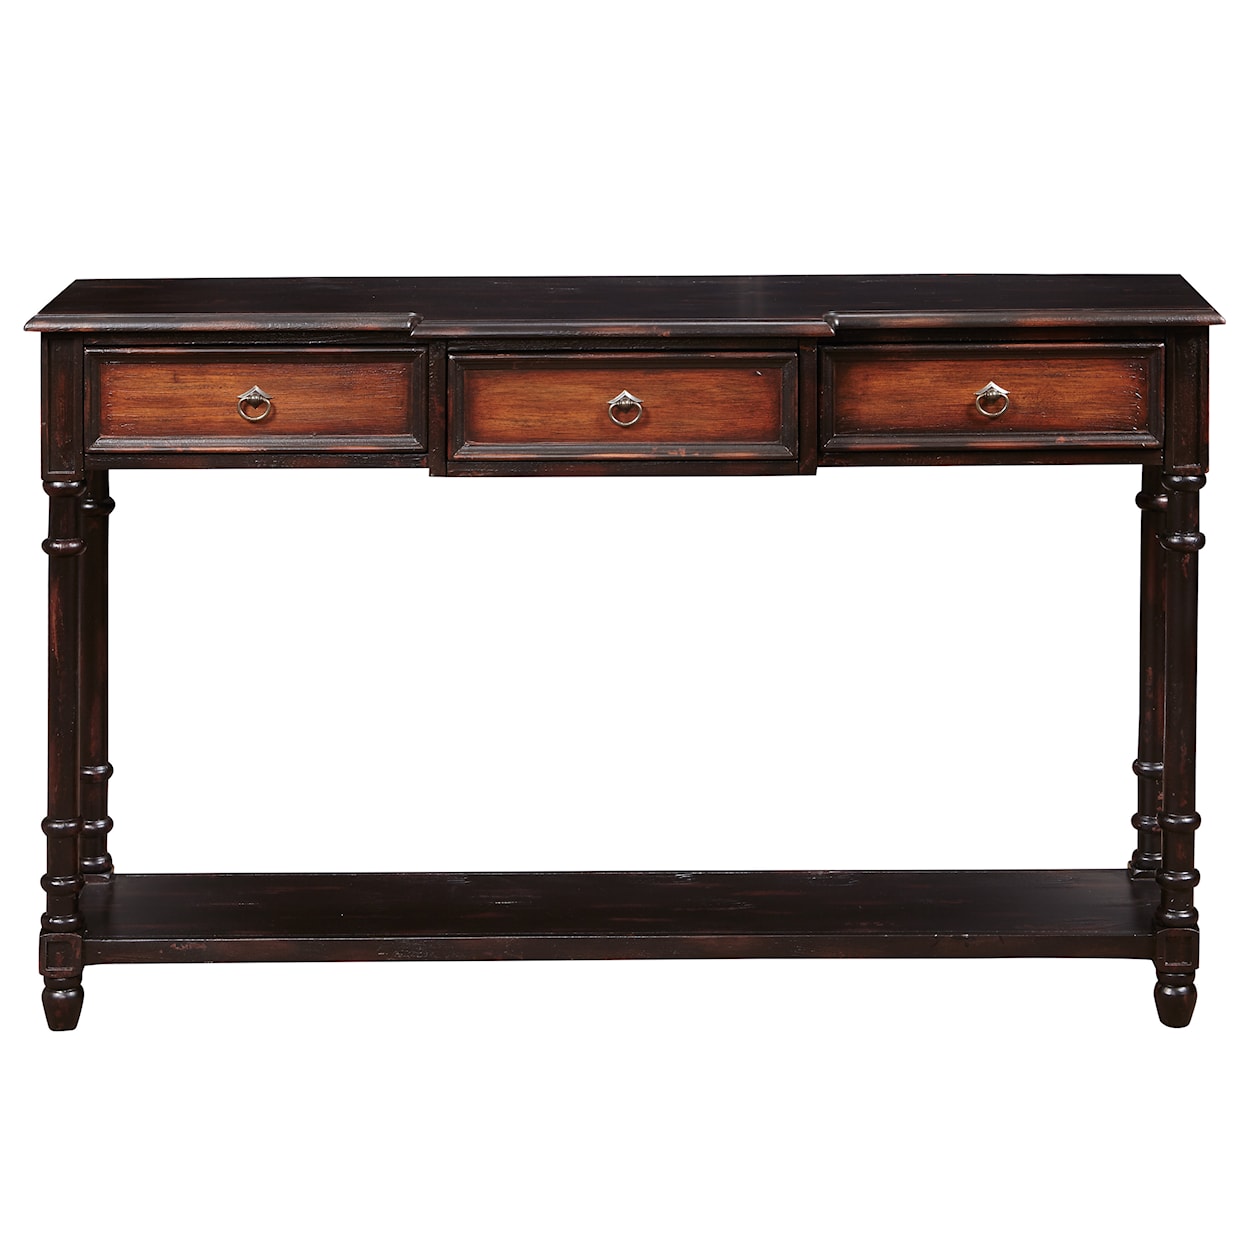 Accentrics Home Accents Black & Brown Two Tone Console Table